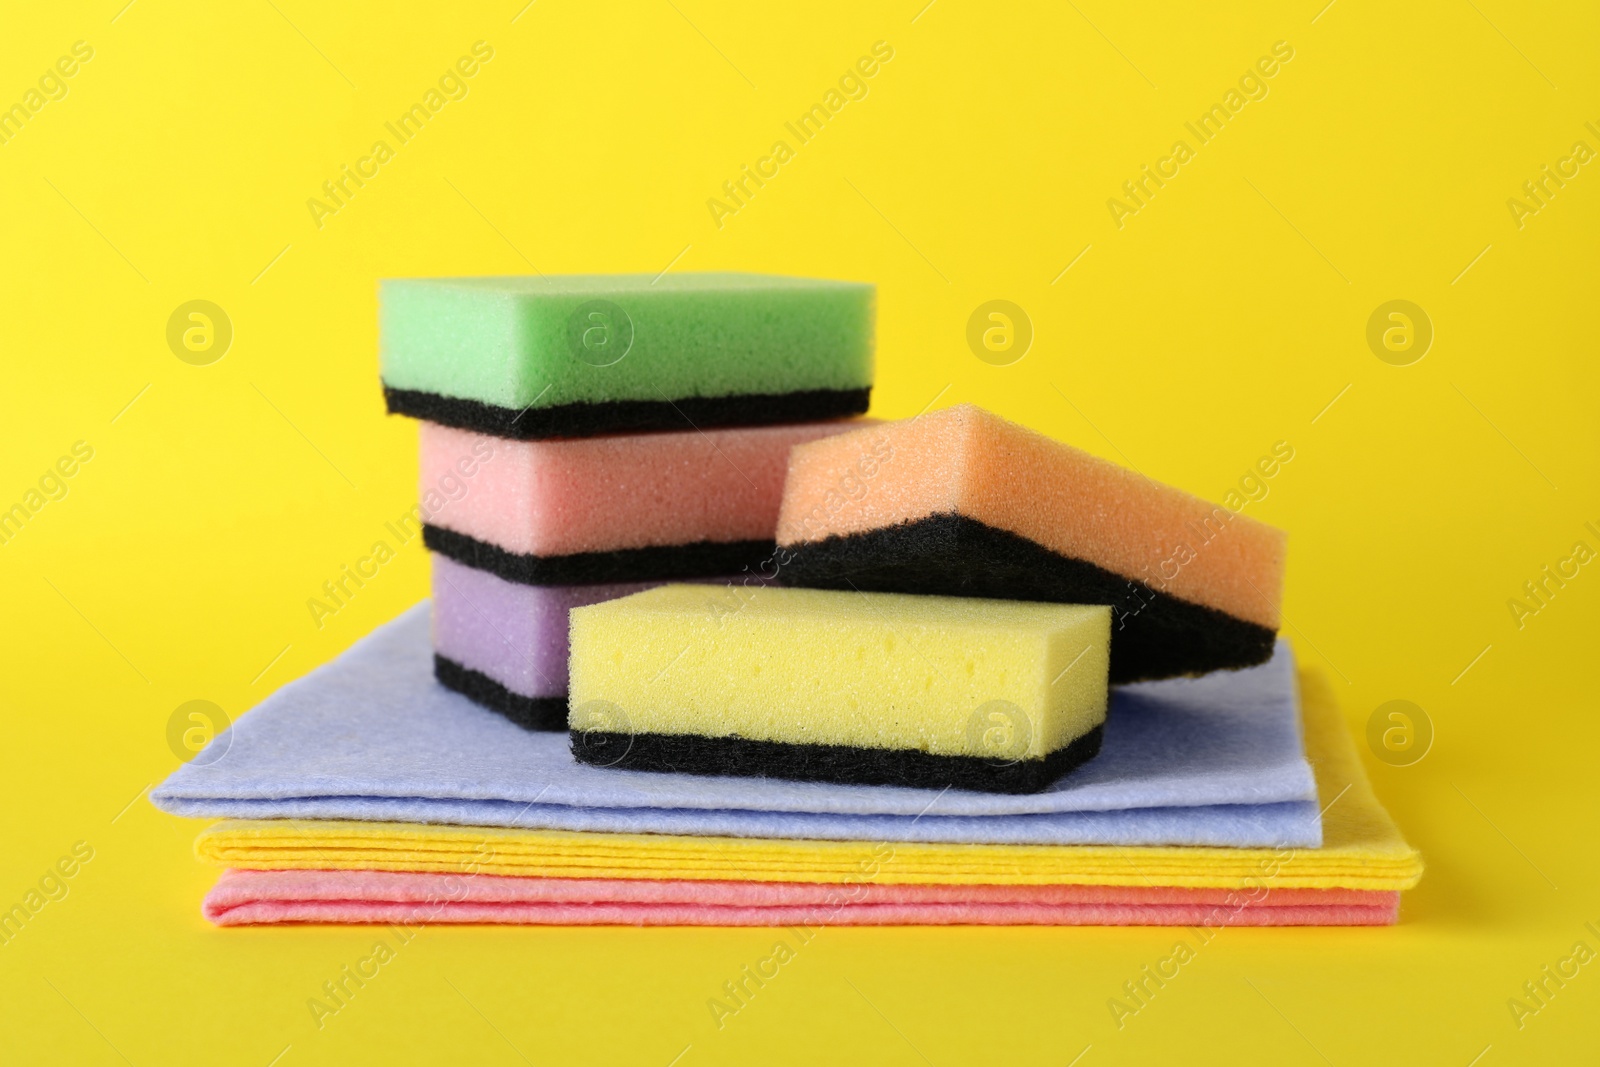 Photo of Cleaning sponges and rags on yellow background